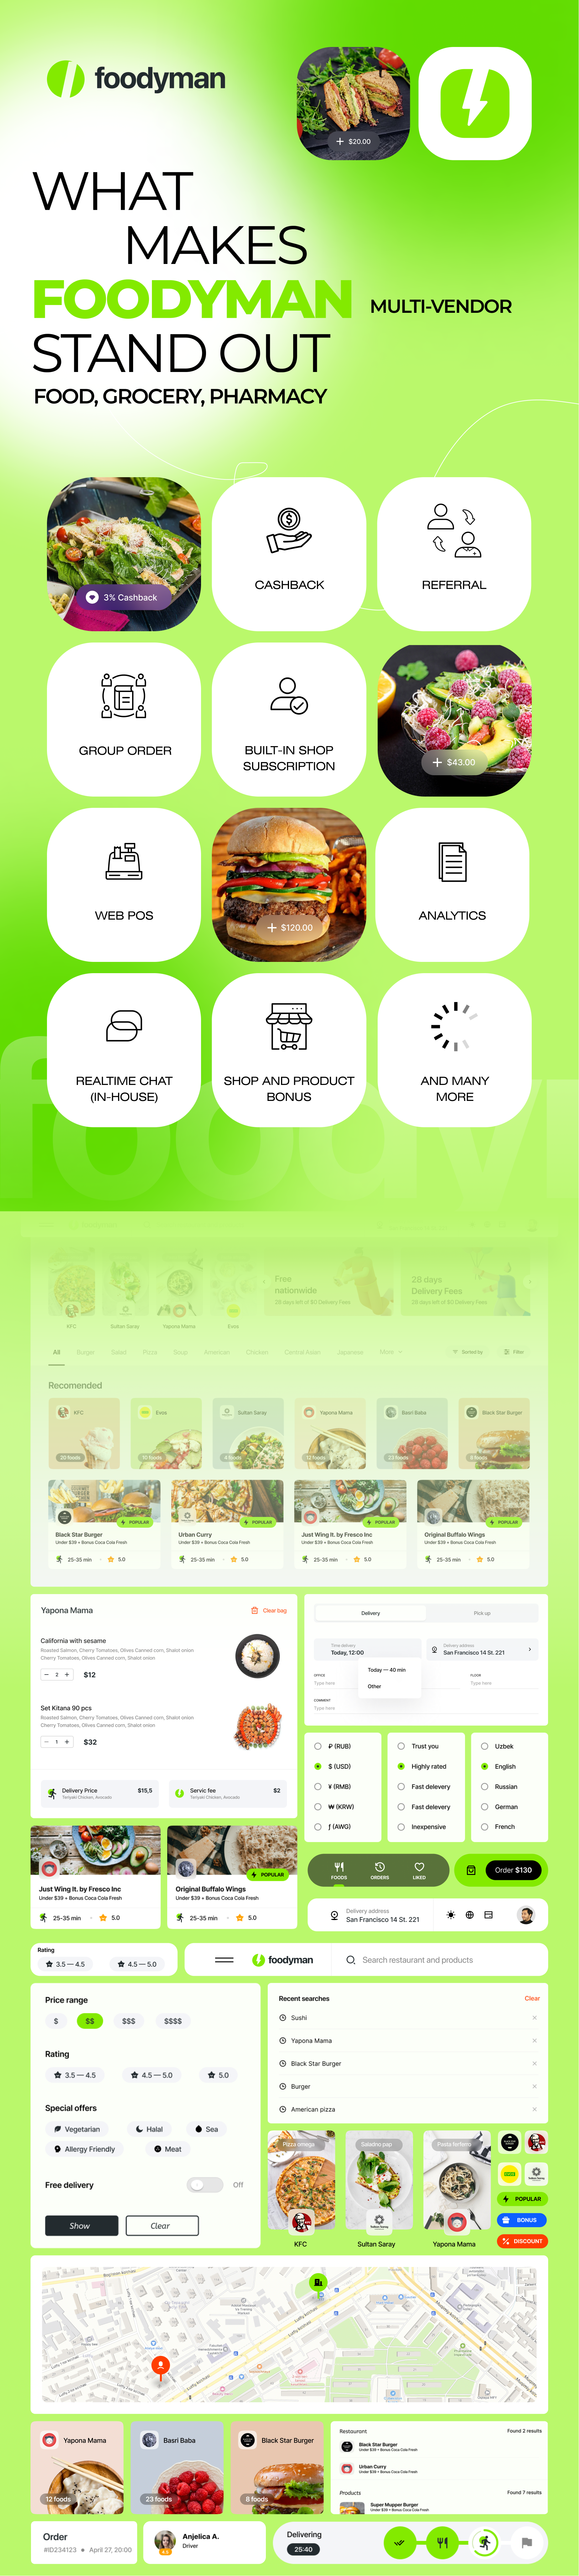 Foodyman - Multi-Restaurant Food and Grocery Ordering and Delivery Marketplace (Web & Customer Apps) - 10